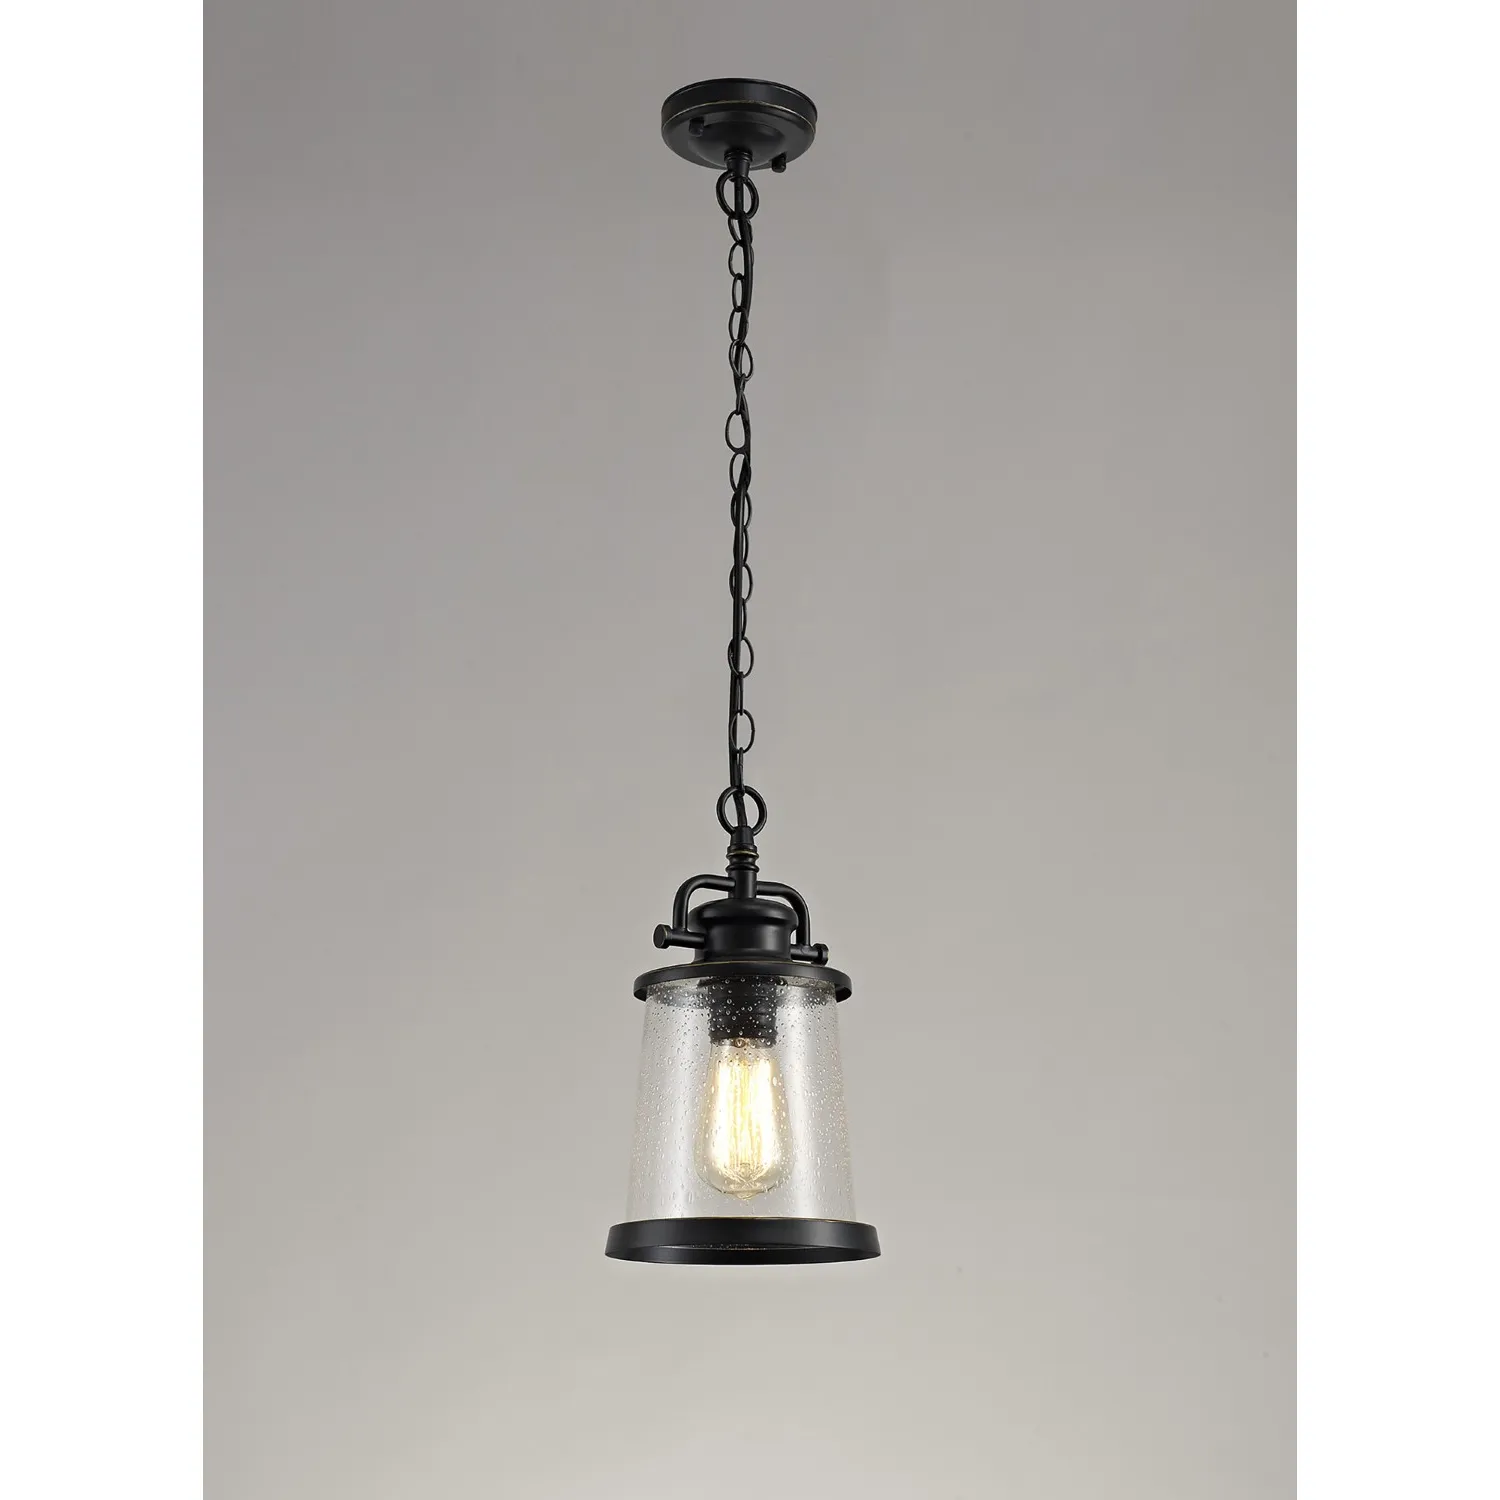 Wandsworth Pendant, 1 x E27, Black Gold With Seeded Clear Glass, IP54, 2yrs Warranty